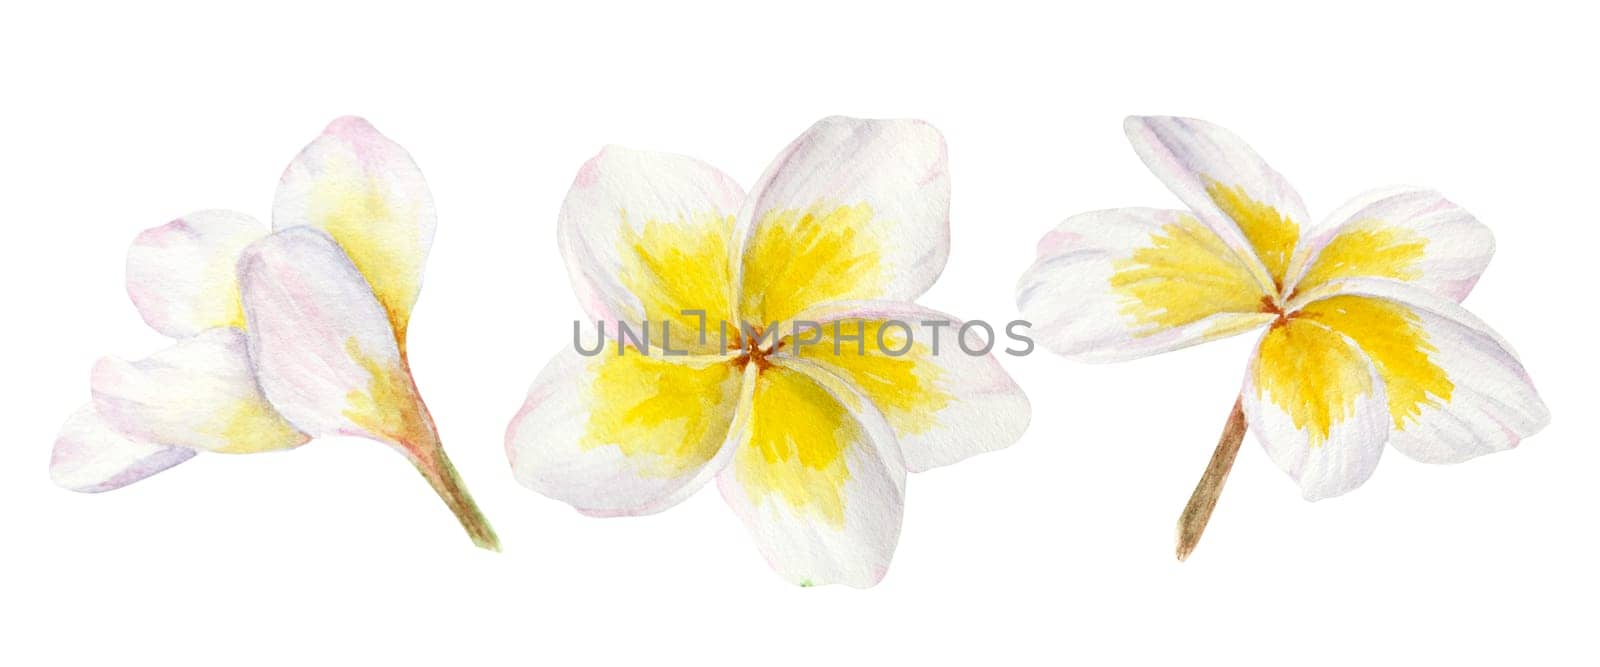 White frangipani illustration. Watercolor hand drawn clip art of exotic flower plumeria. Tropical painting for wedding invitations, spa and massage salon prints, cosmetic packing, travel guides.